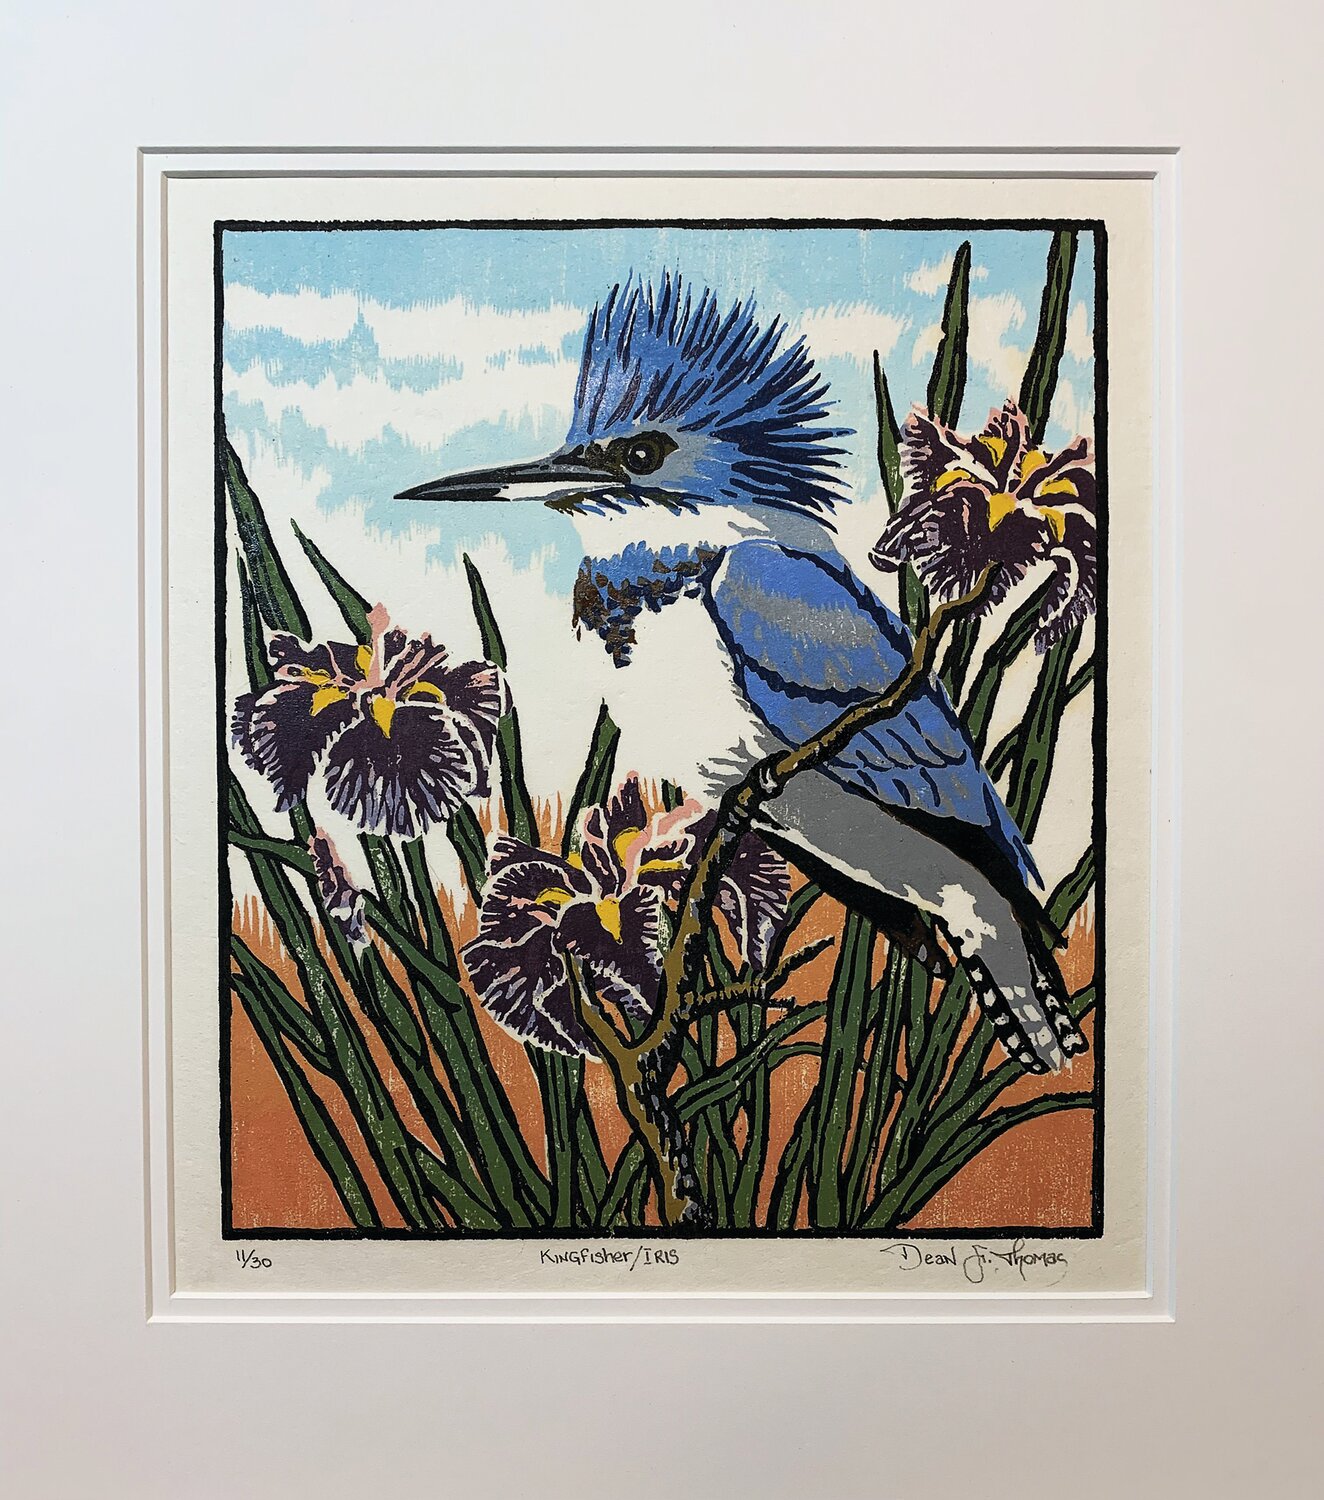 “Kingfisher/Iris” by Dean Thomas, is a color woodcut.